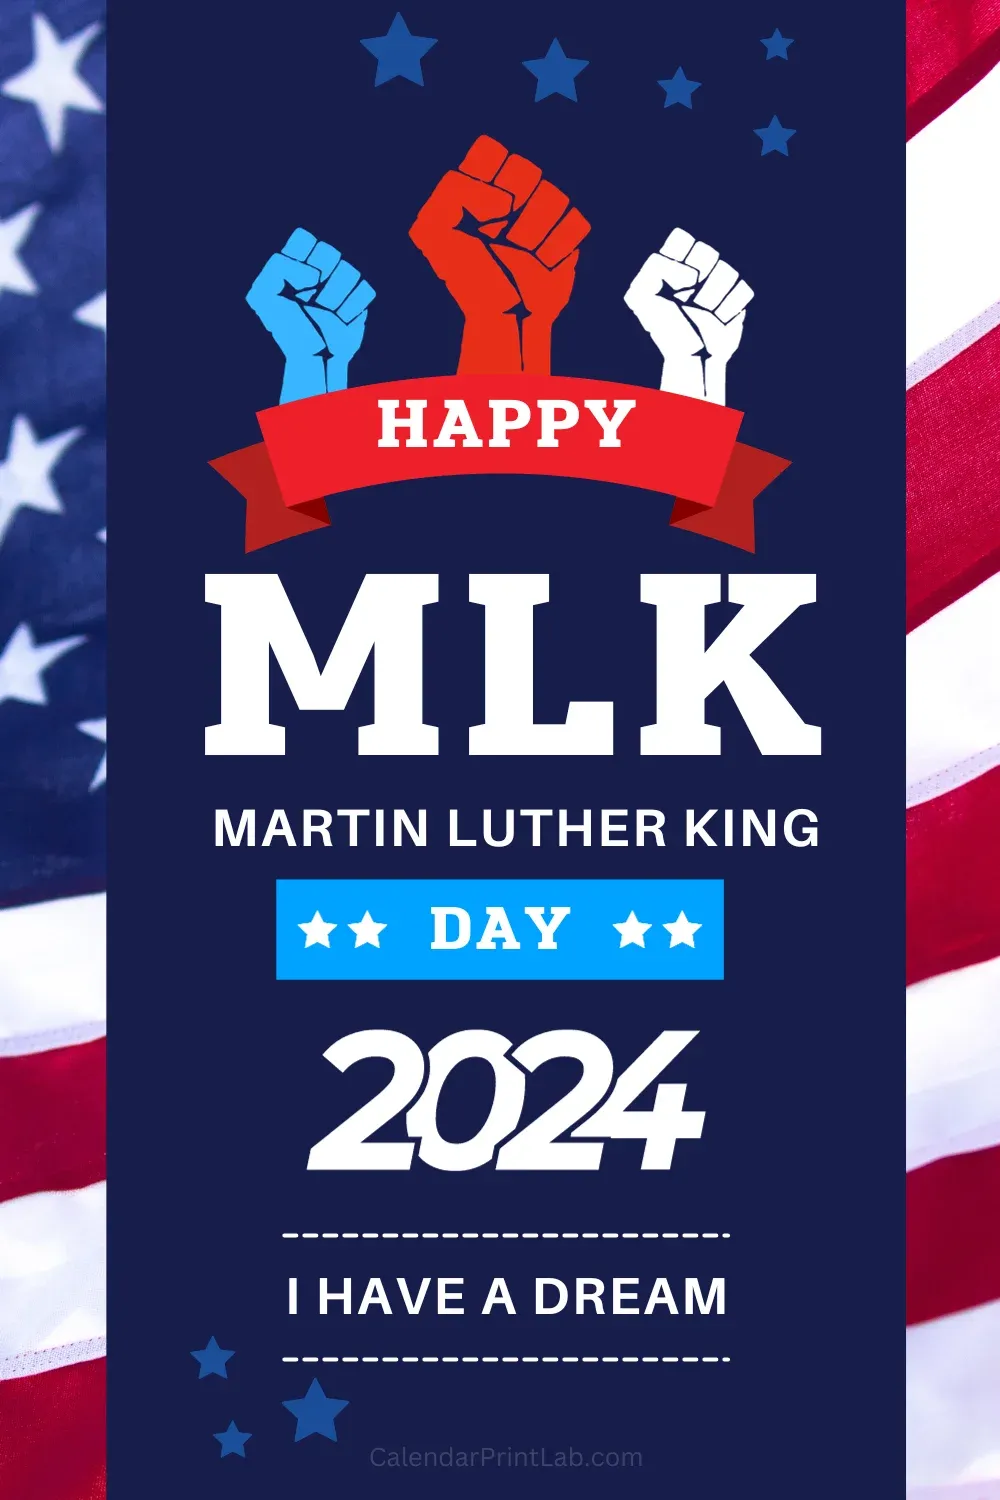 Happy Martin Luther King Day 2024 Image